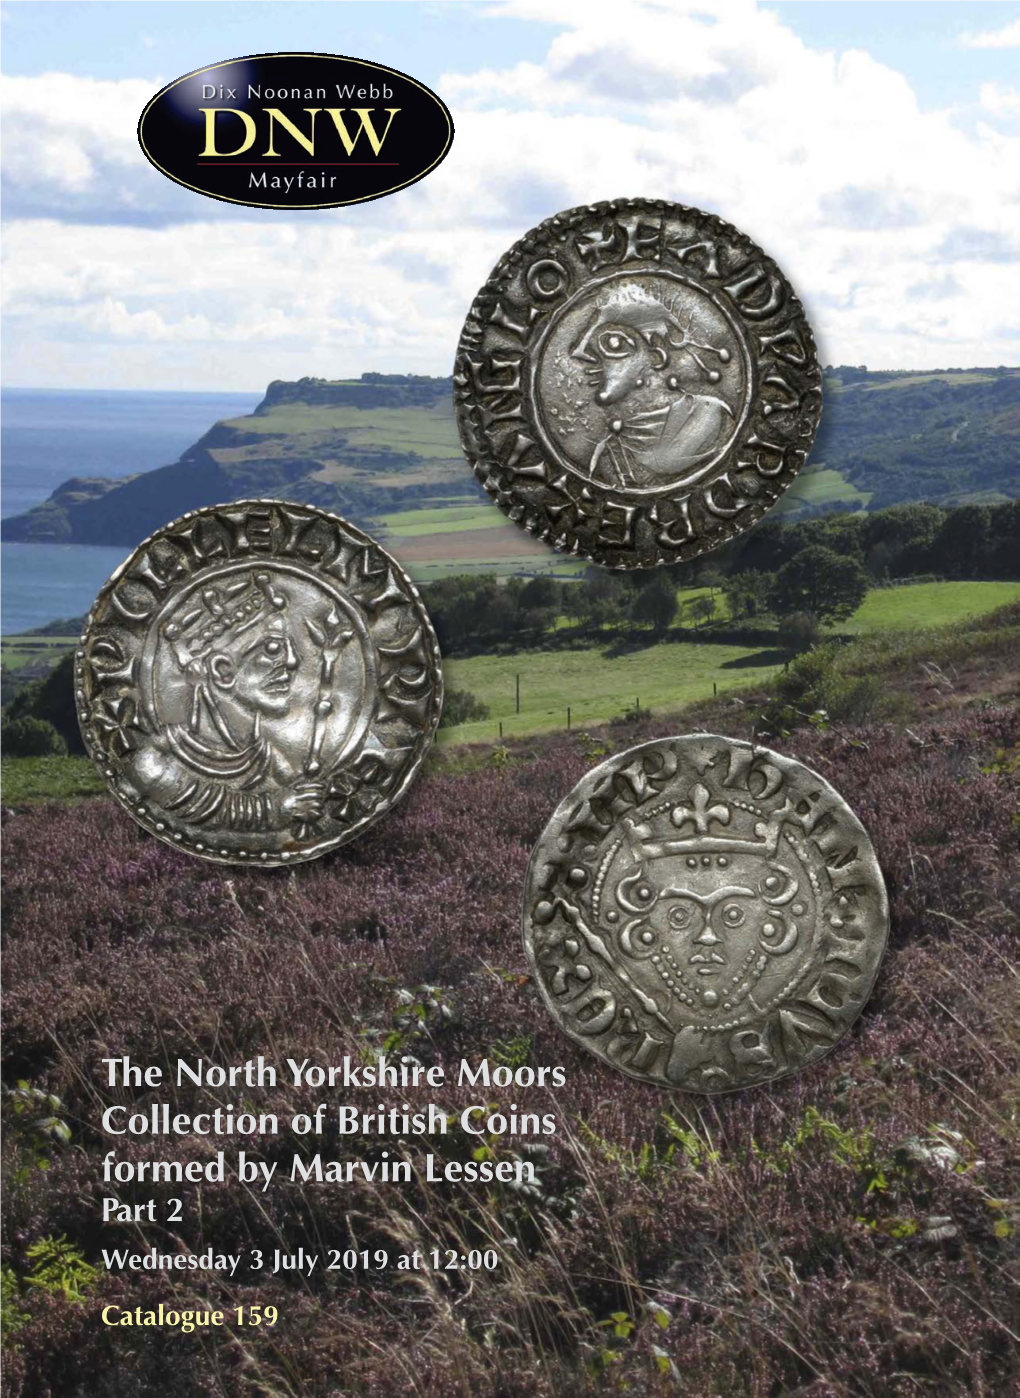 The North Yorkshire Moors Collection of British Coins Formed by Marvin